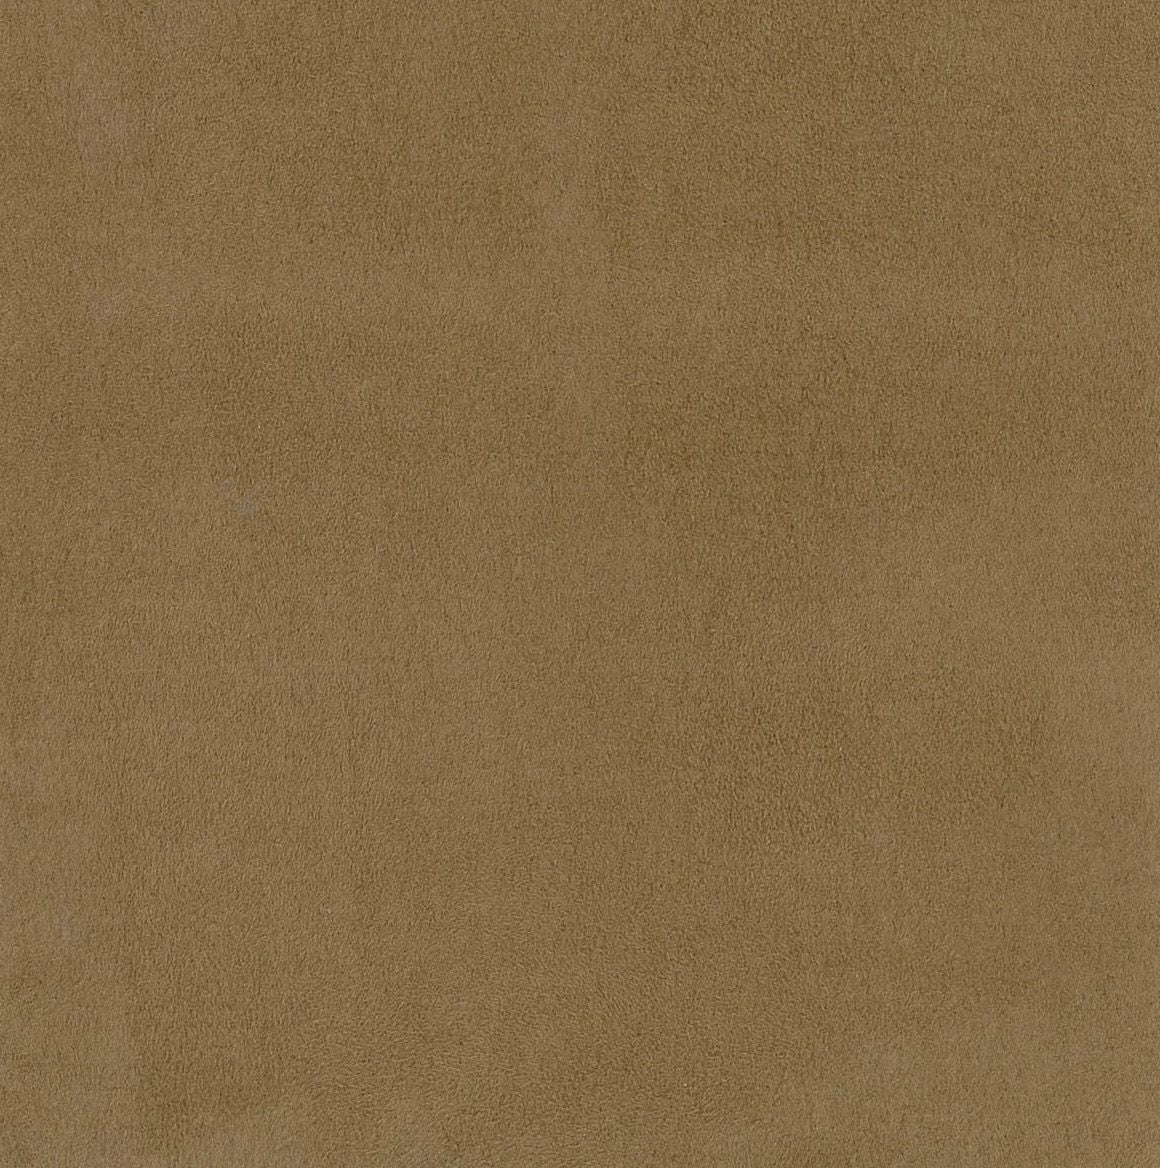 Sarabelle Suede fabric in camel color - pattern number H6 0010SARA - by Scalamandre in the Old World Weavers collection